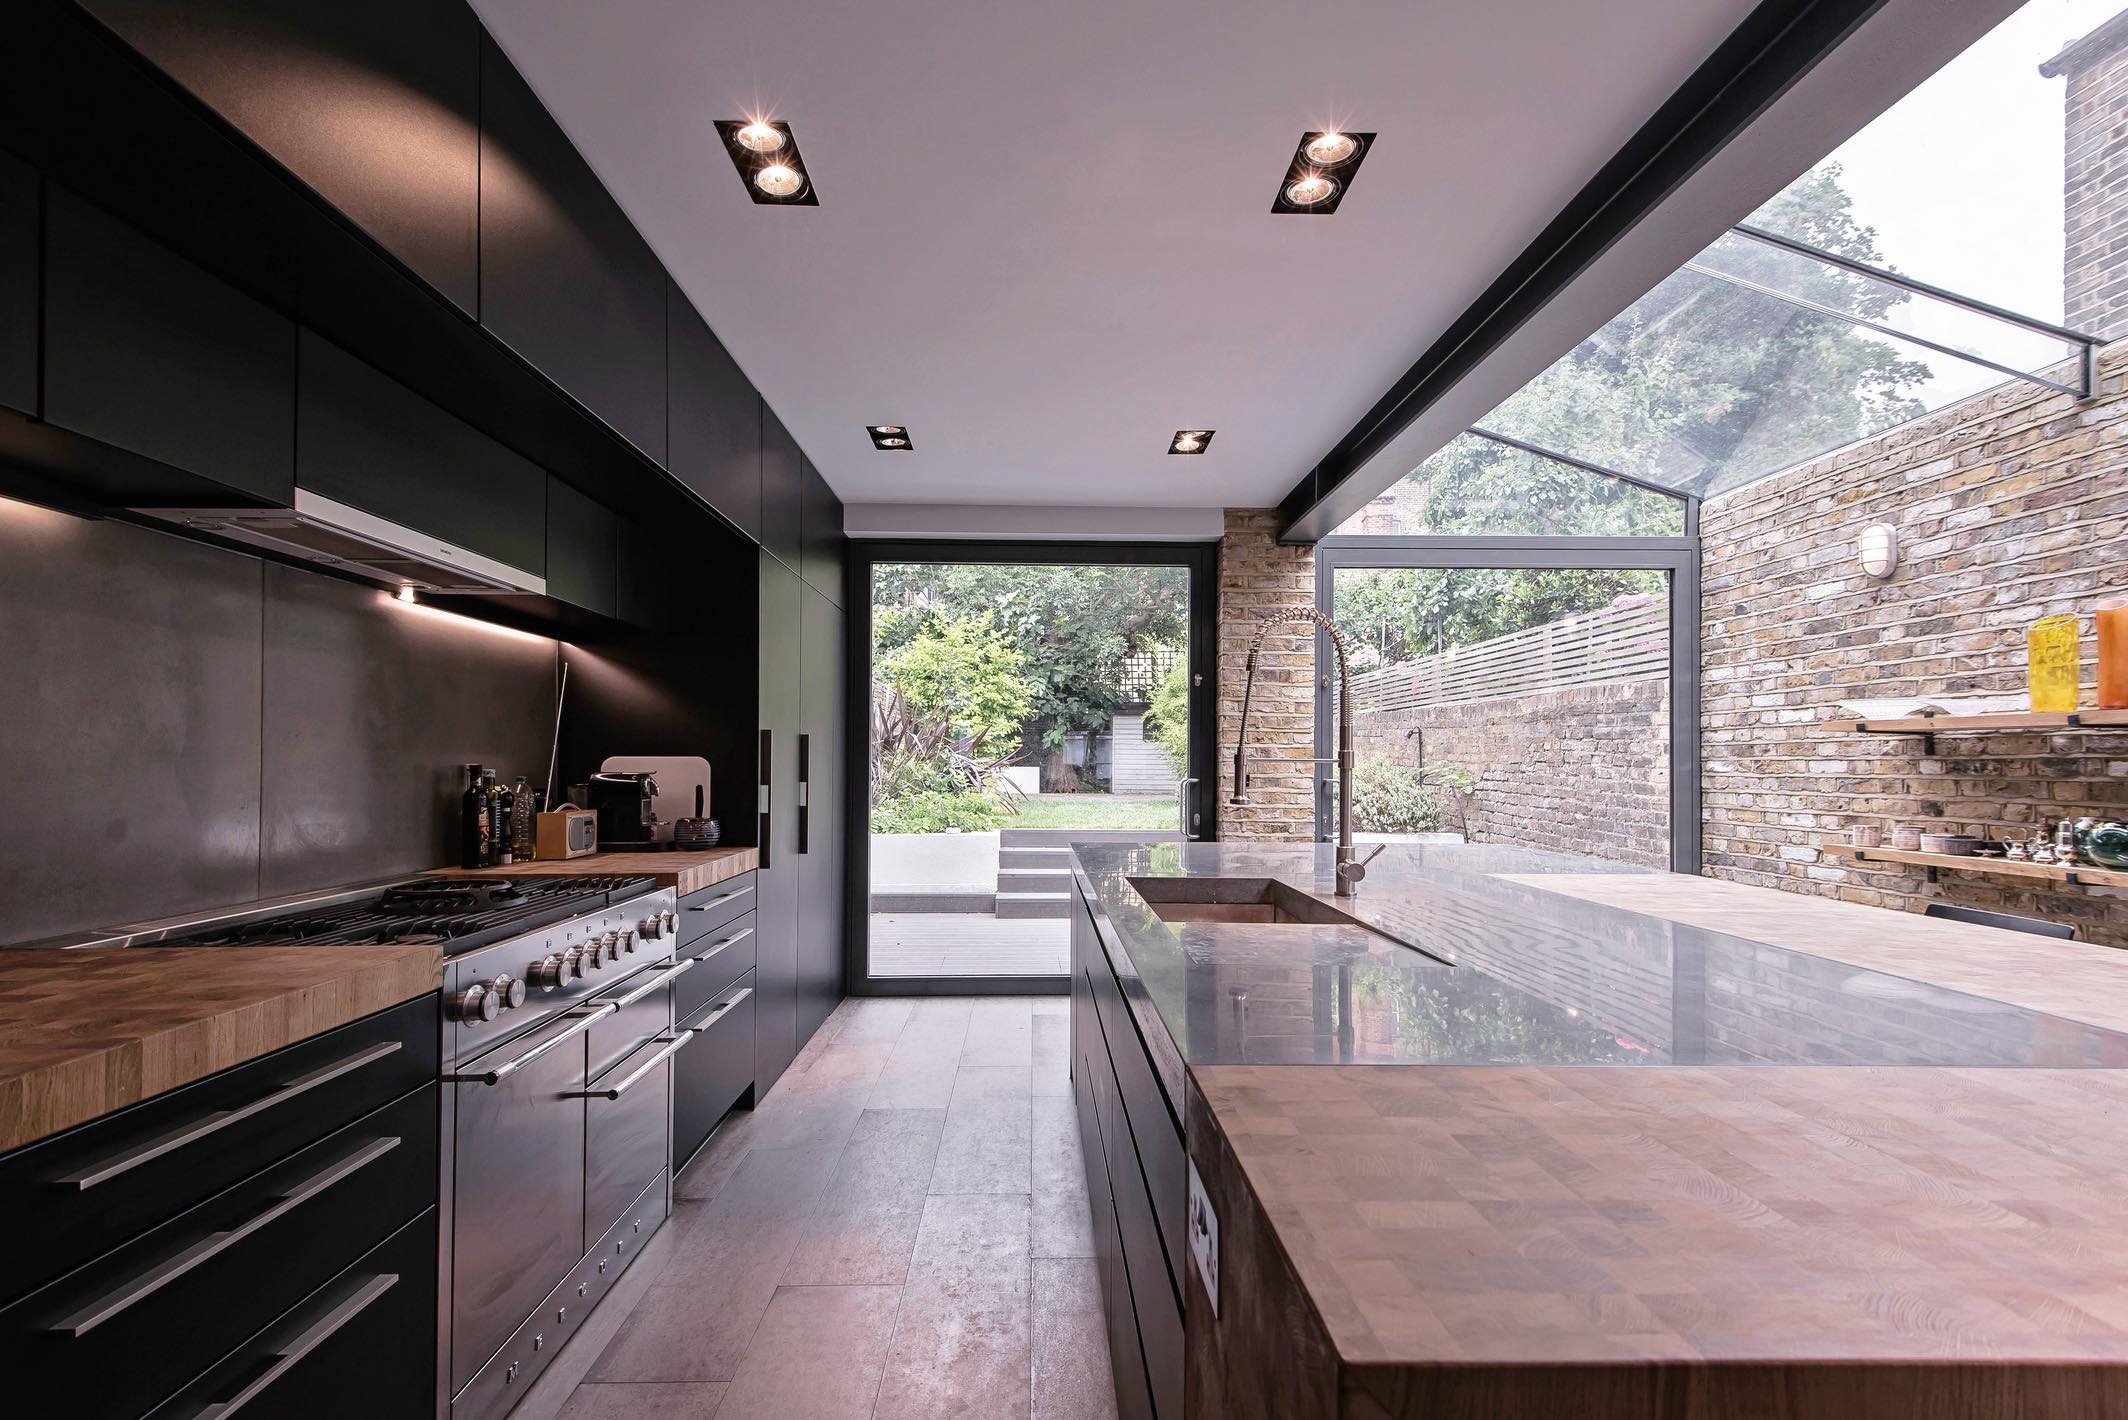 Holloway Extension, North London - Designed by ATELIERwest Ltd. 2